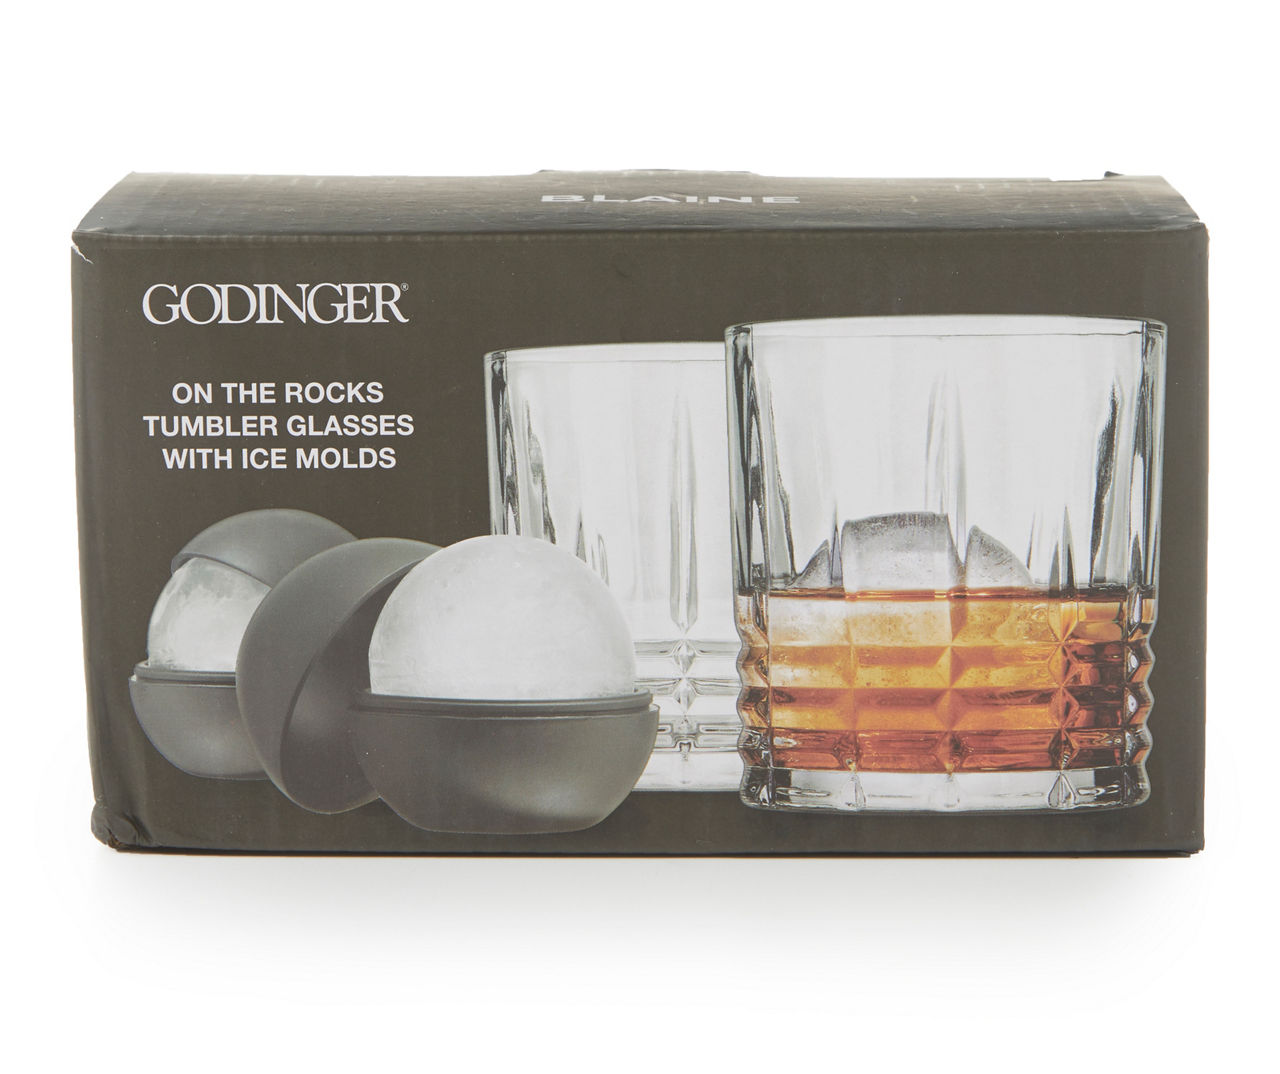 Glacier Rocks® 4-Piece Ice Ball Mold and Tumbler Set by Visk